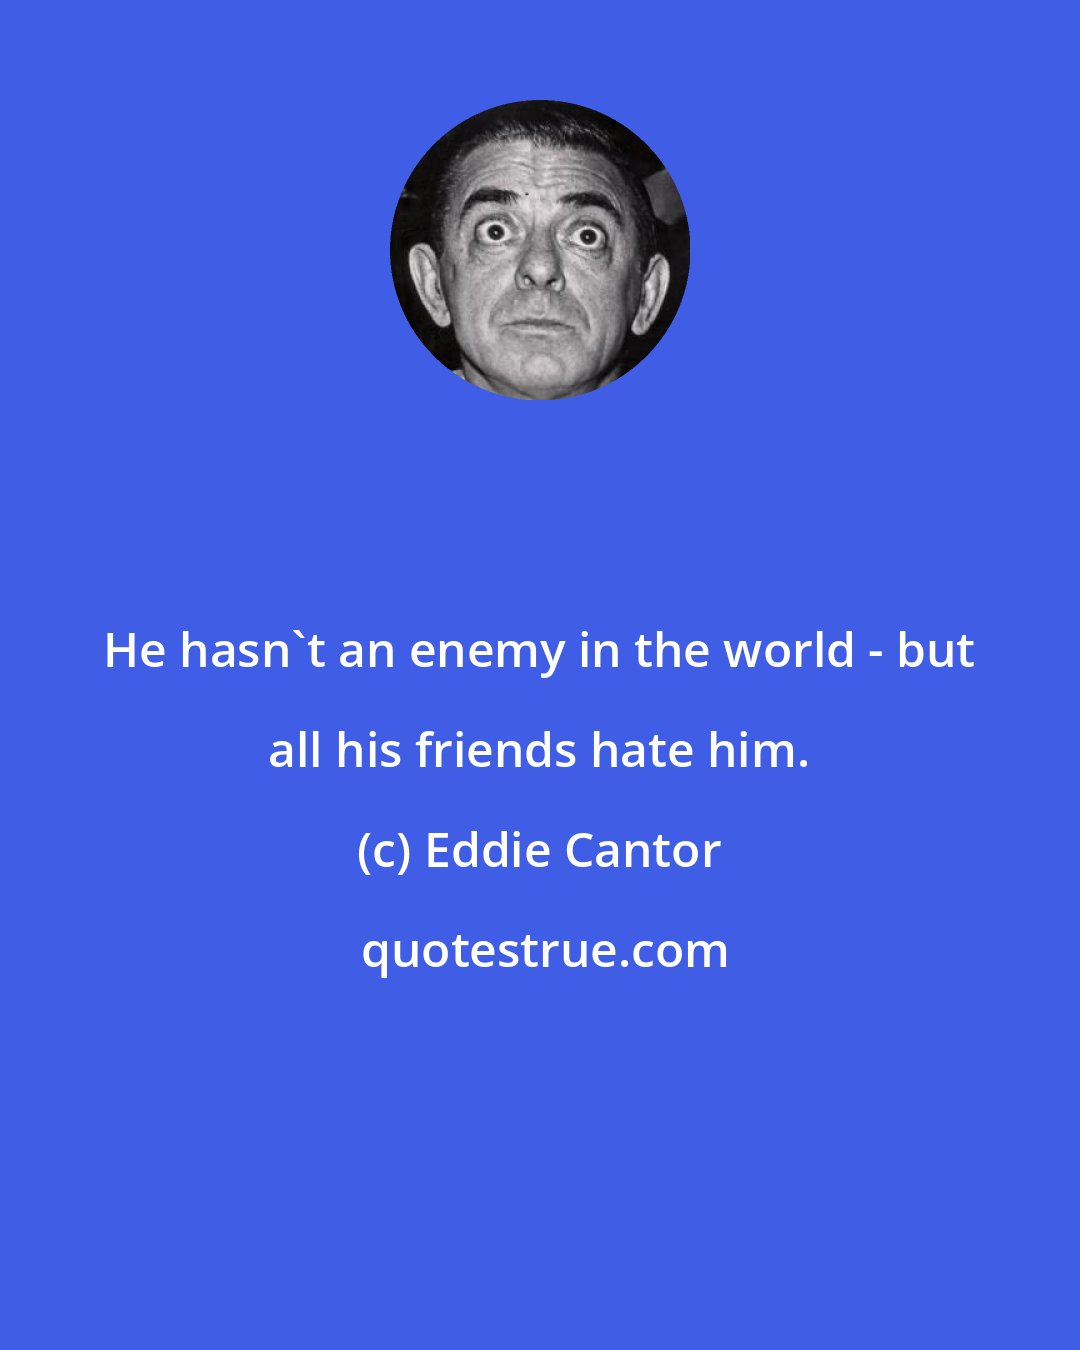 Eddie Cantor: He hasn't an enemy in the world - but all his friends hate him.